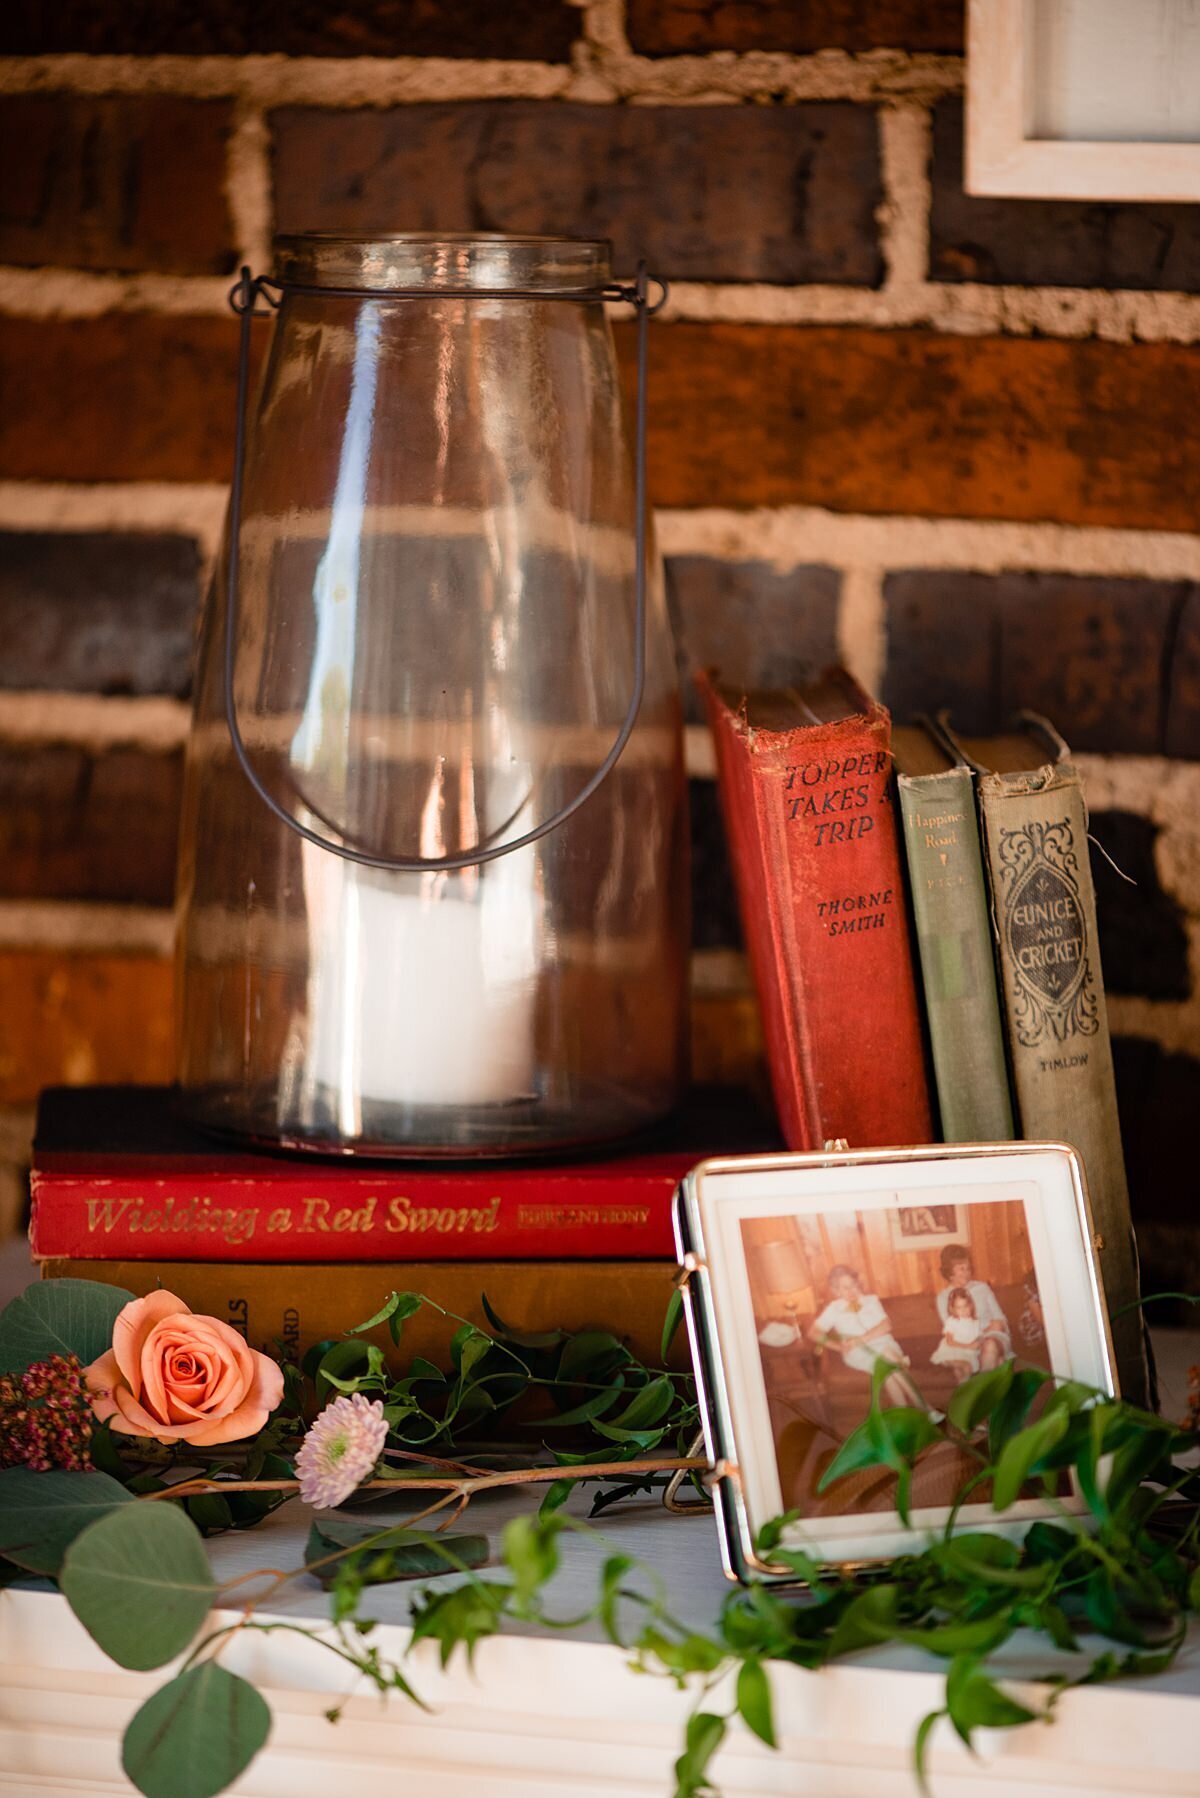 Sitting in front of an exposed brick wall is a shelf with antique books and a large clear glass hurricane lamp with a white pillar candle. In front of the lantern is a n old photograph with greenery and a peach tea rose.